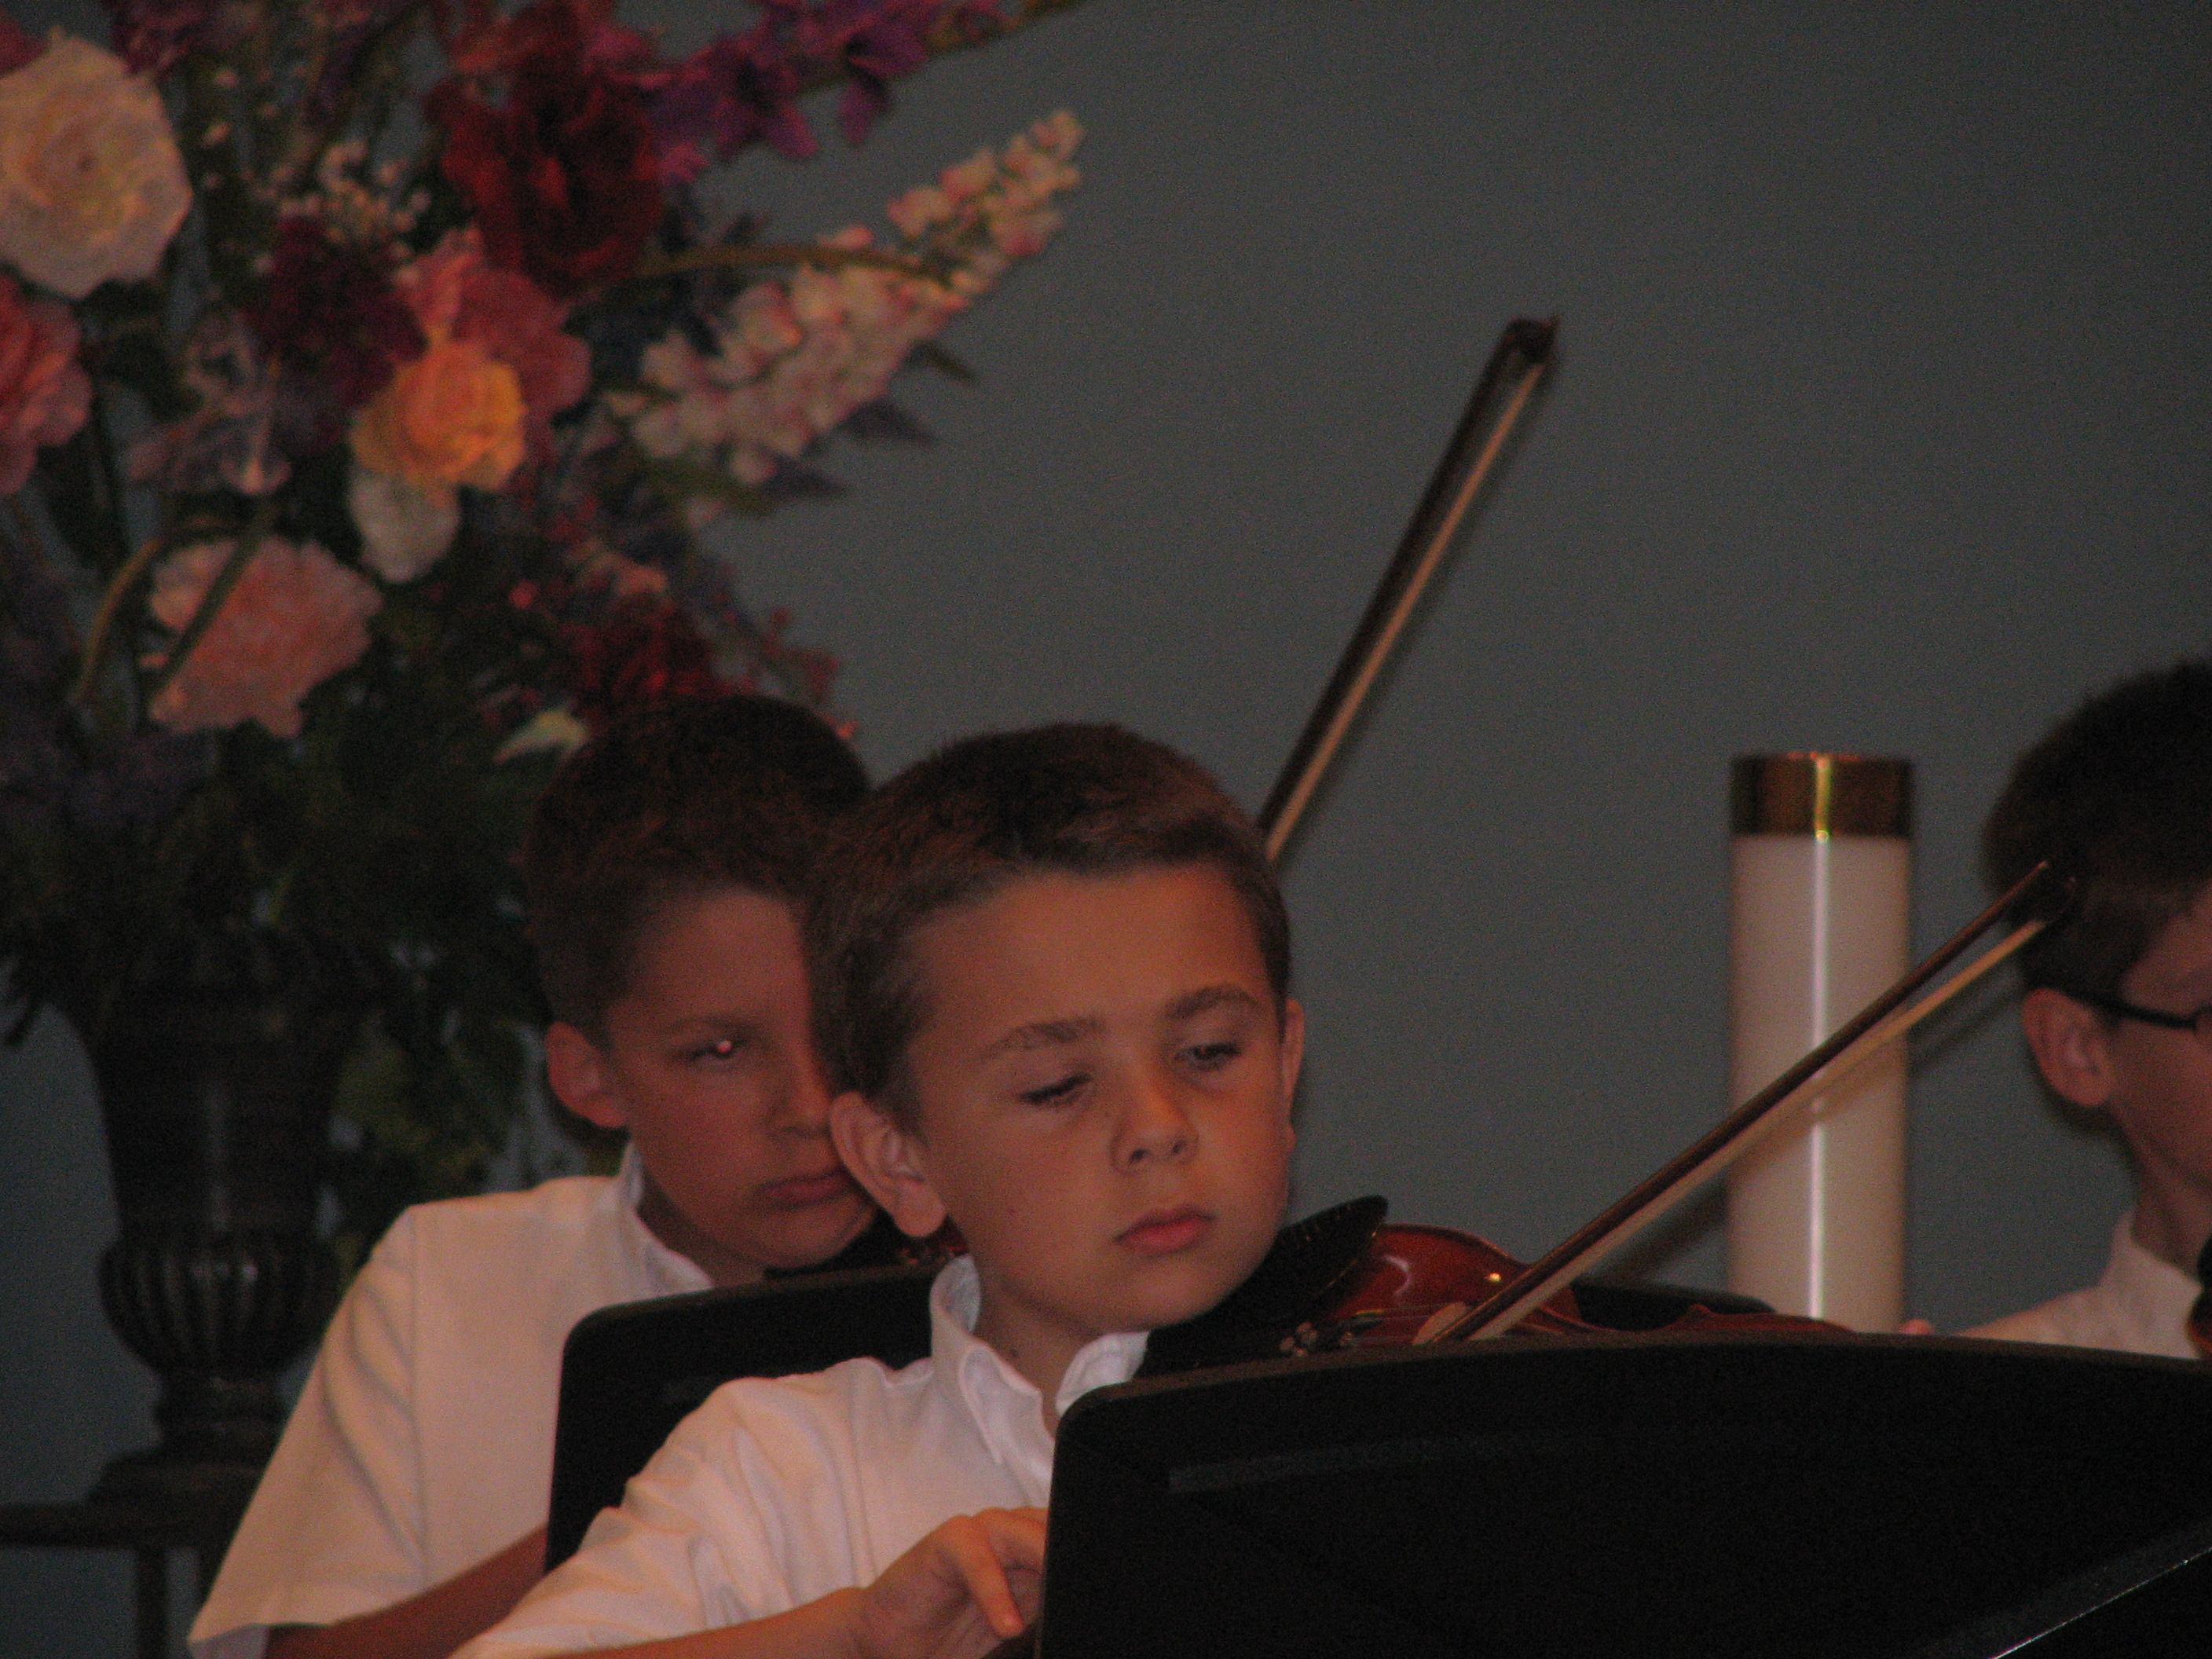 Playing Violin at a School Concert